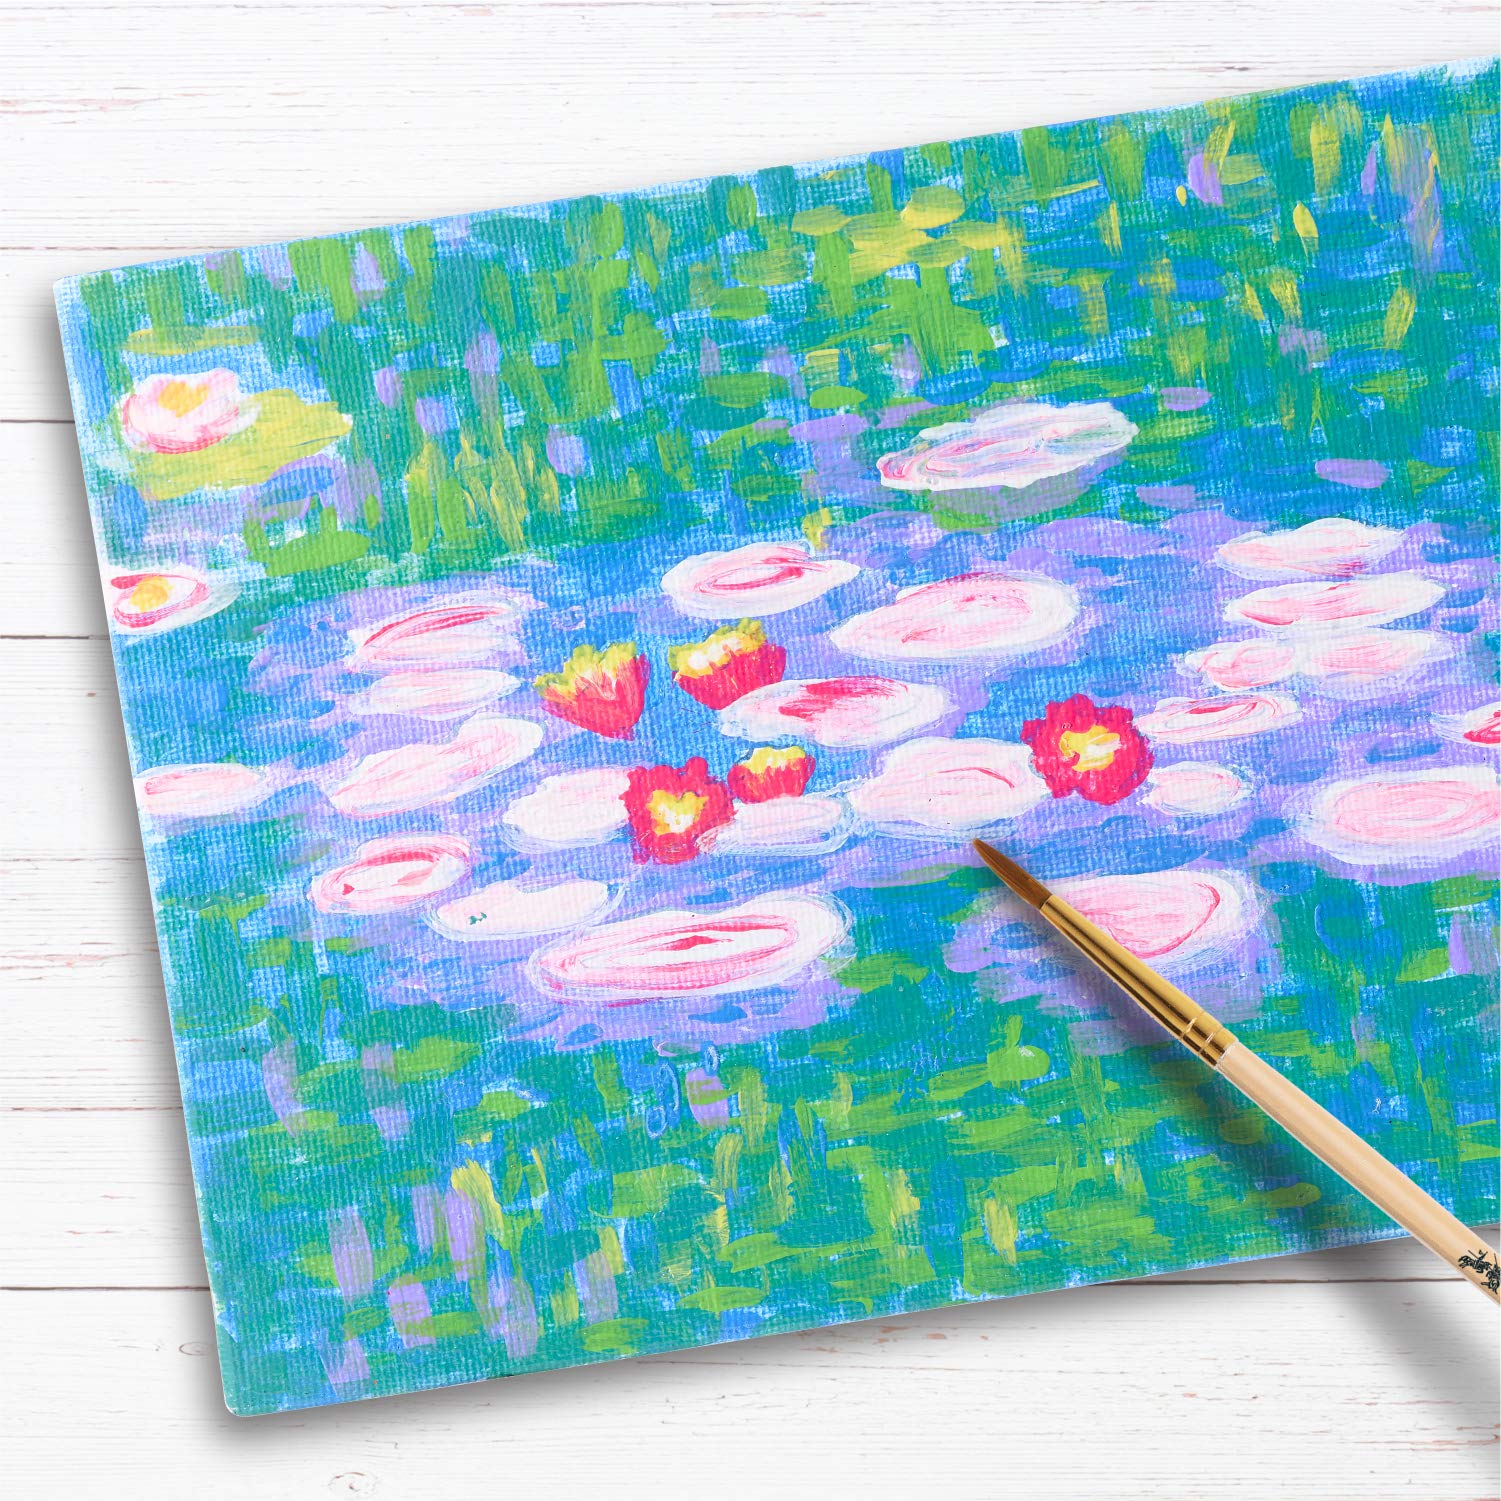 Faber-Castell Museum Series Paint by Numbers - Claude Monet Water Lilies - Number Painting for Kids and Adult Beginners